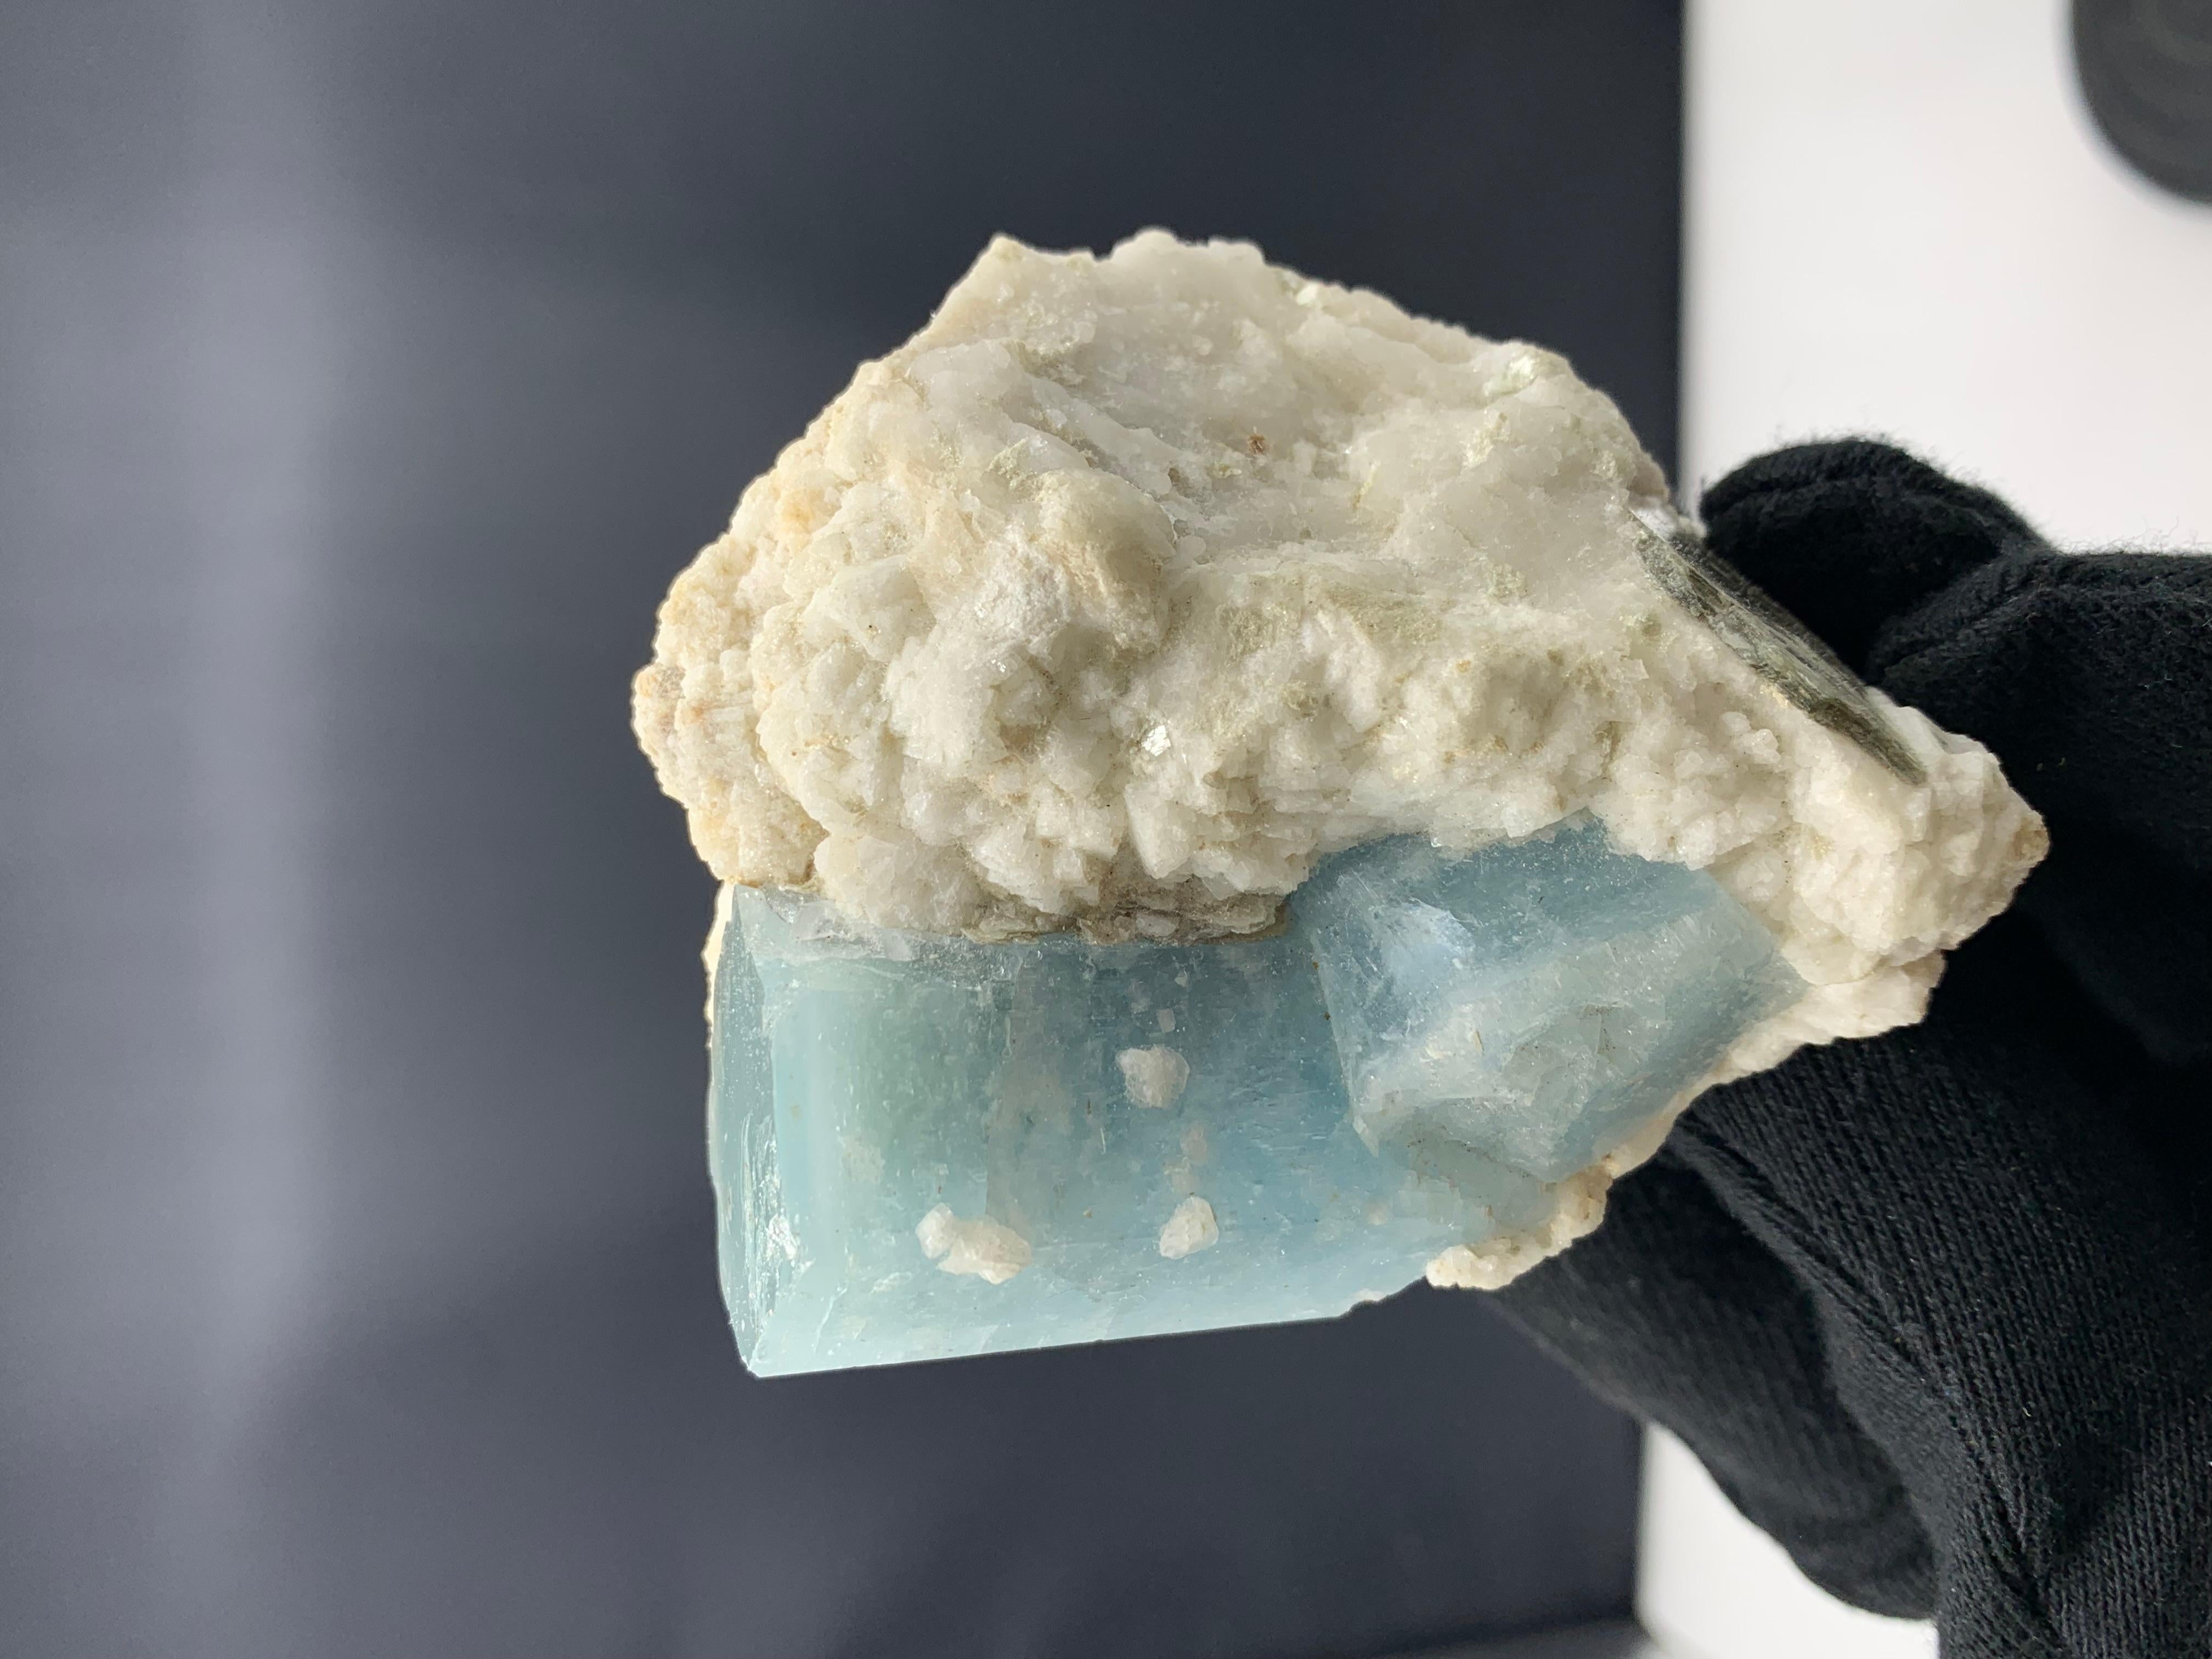 Rock Crystal 207.32 Gram Aquamarine Specimen Attached With Matrix From Afghanistan For Sale